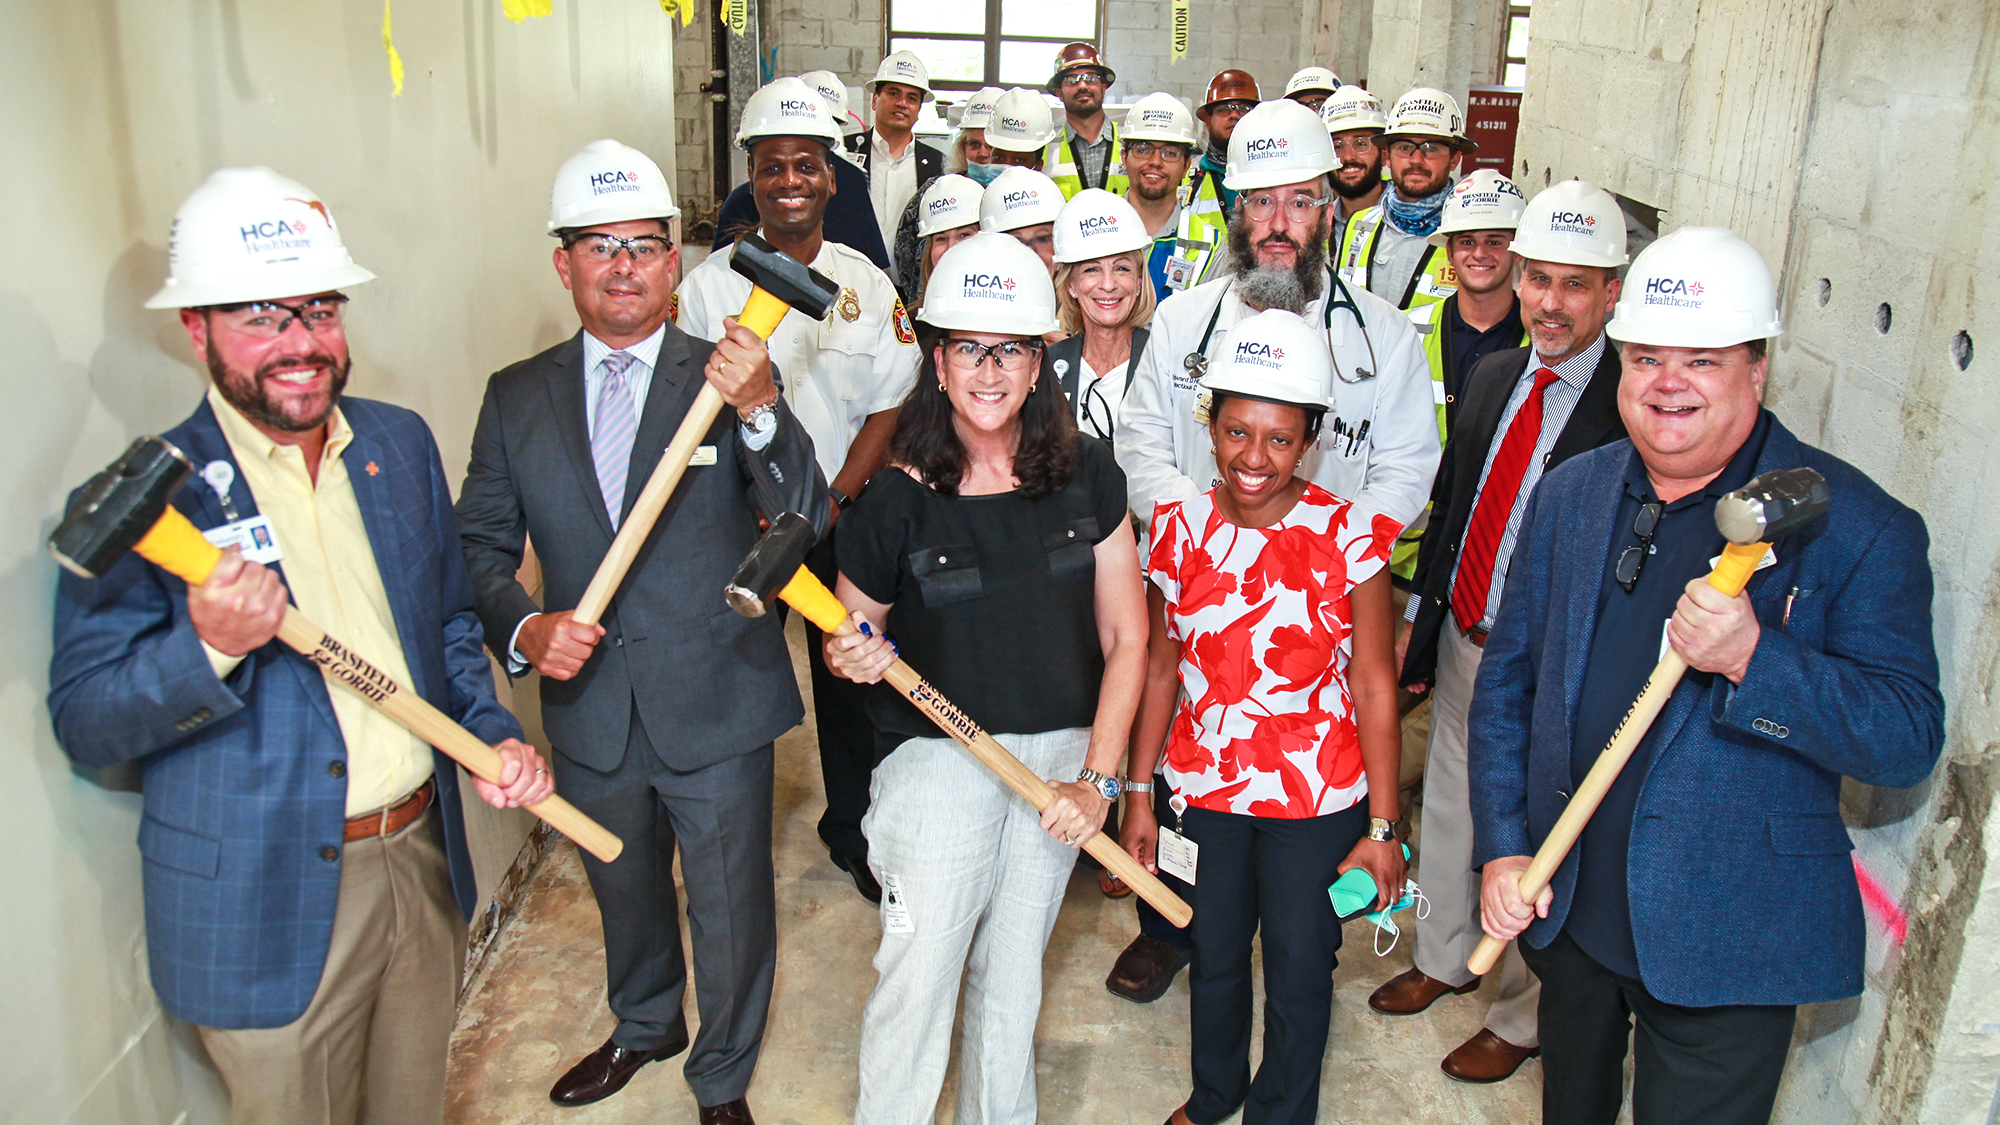 University Hospital and Medical Center Announce $16 Million in Construction Upgrades